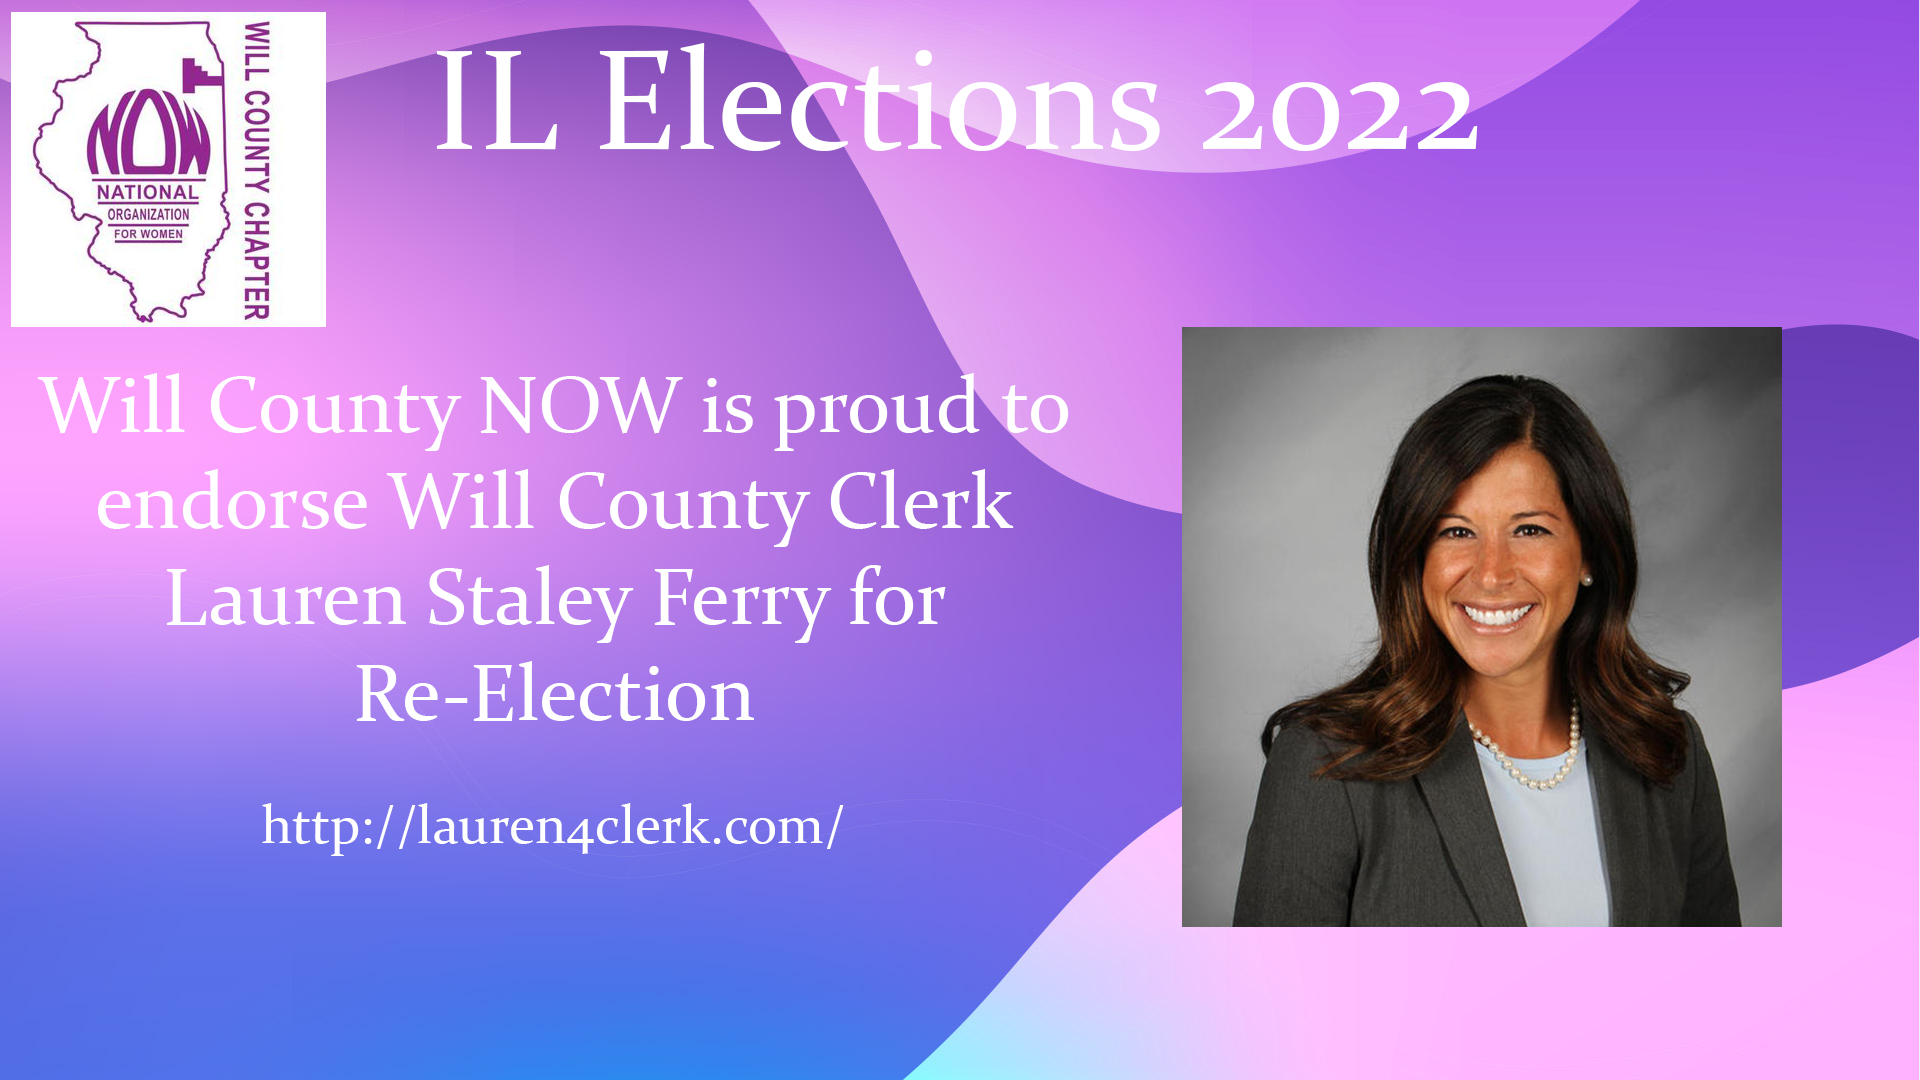 Will County NOW Endorses Will County Clerk Lauren Staley Ferry for Re-Election